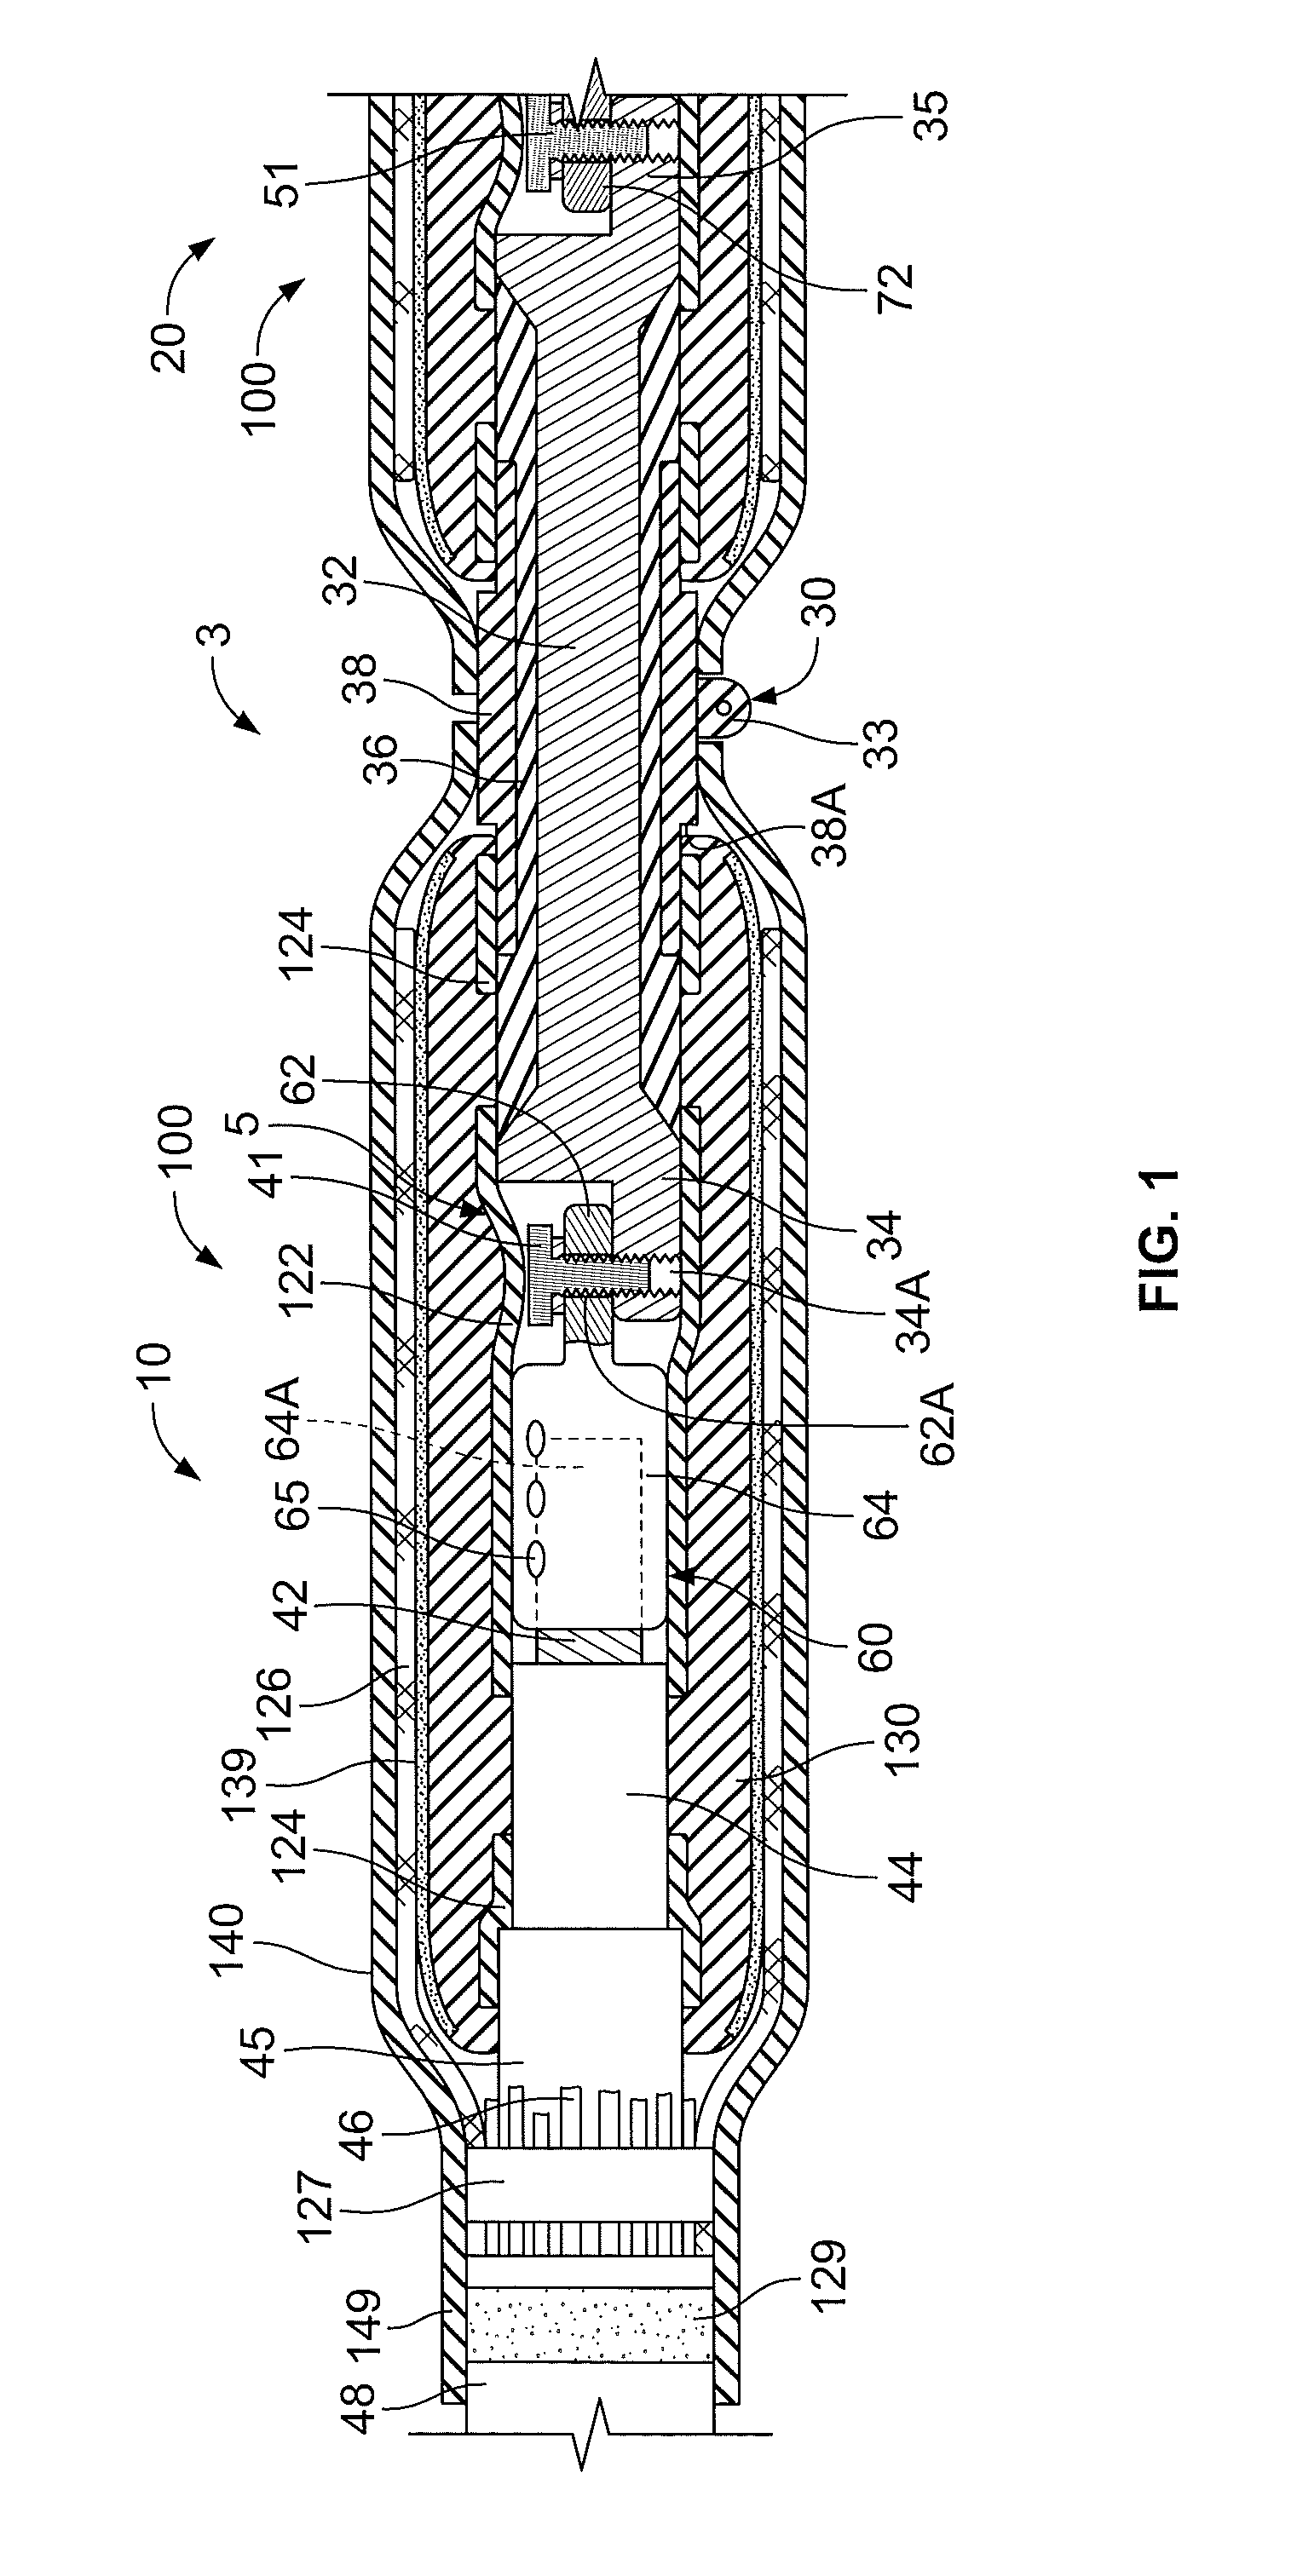 Methods and systems for forming a protected disconnectable joint assembly